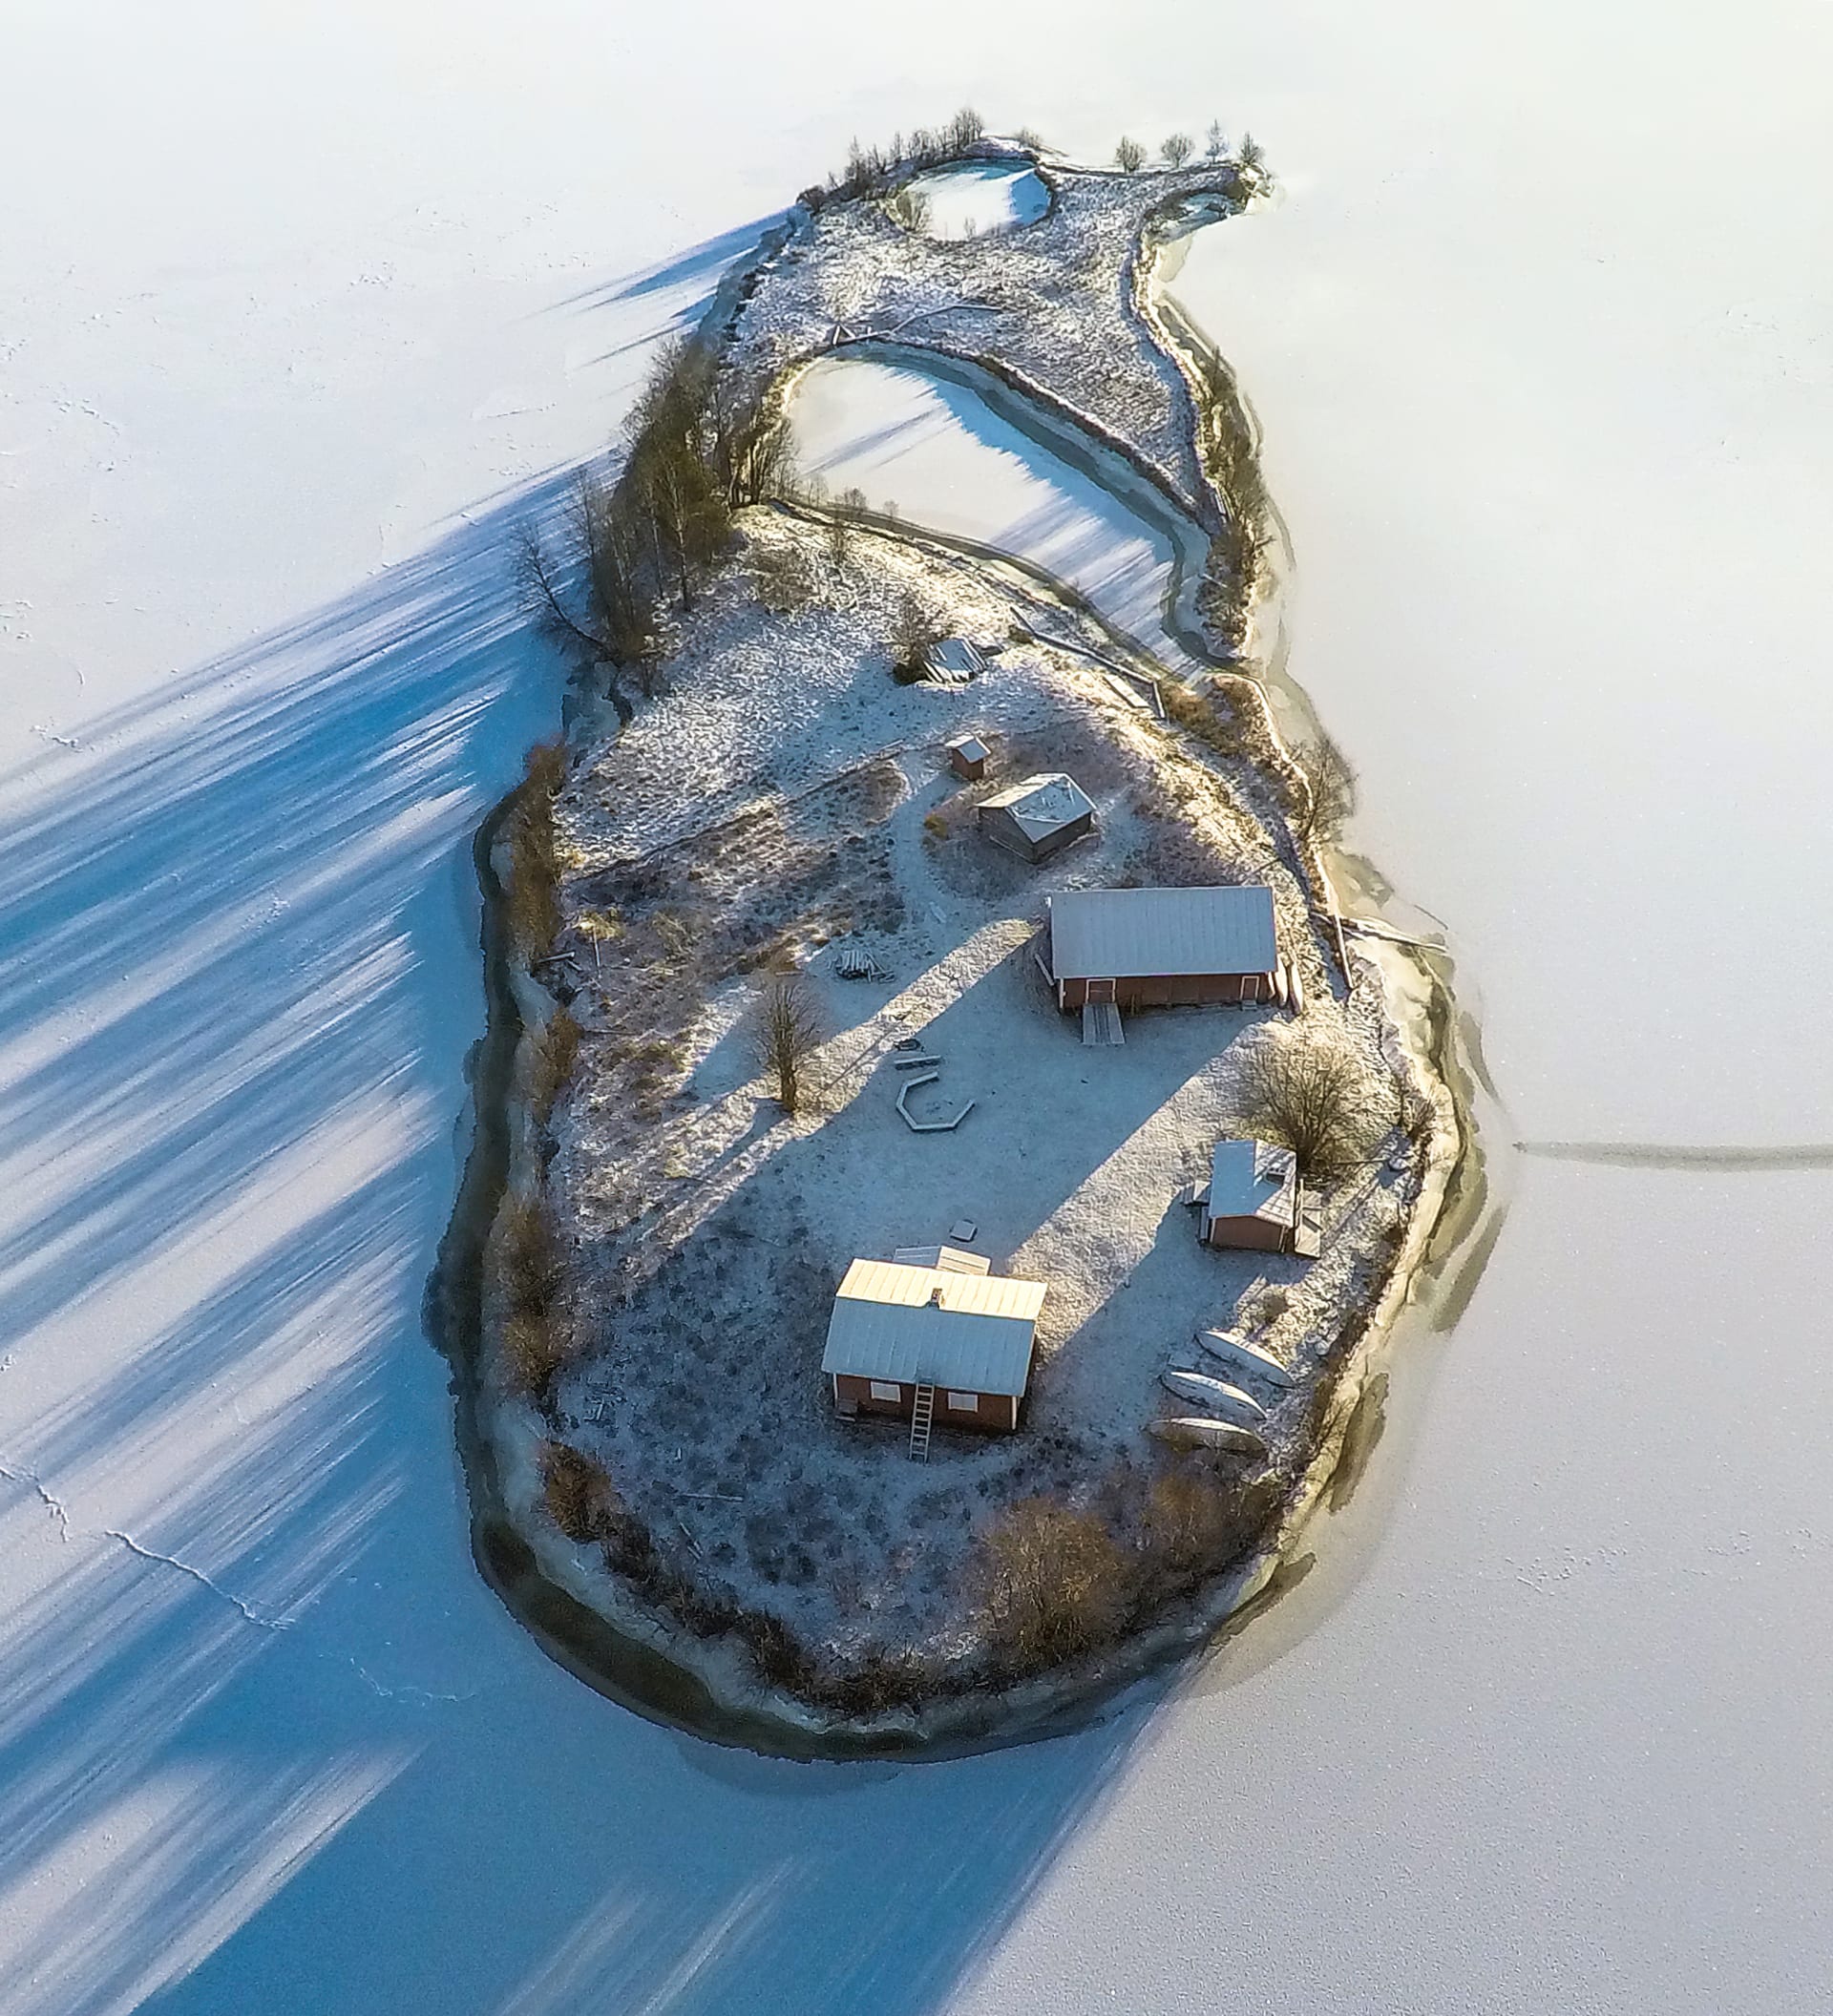 This is how the four seasons change on this small island in Finland